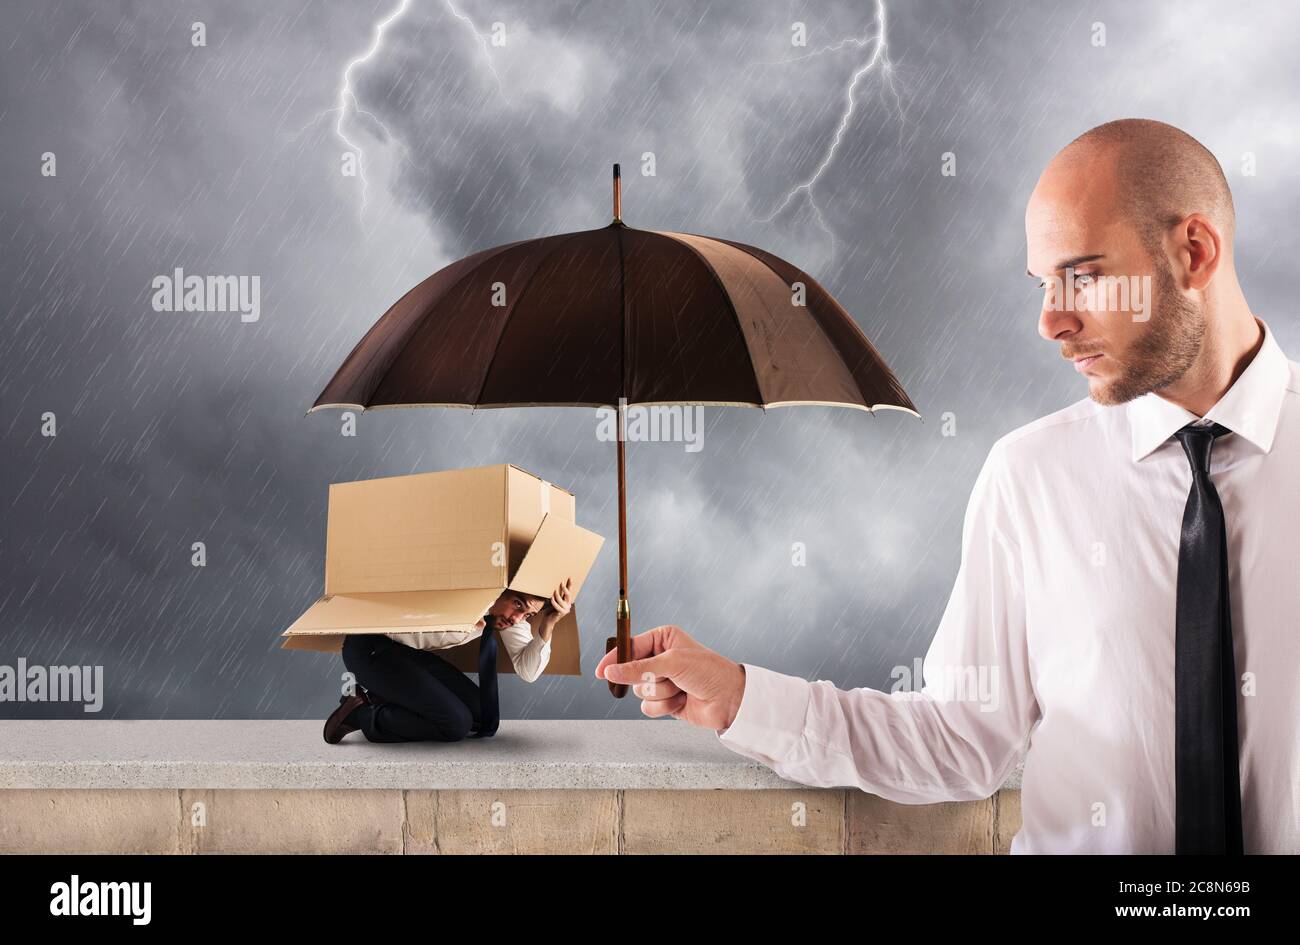 Concept of assistance in your business with a big businessman that holds an umbrella Stock Photo